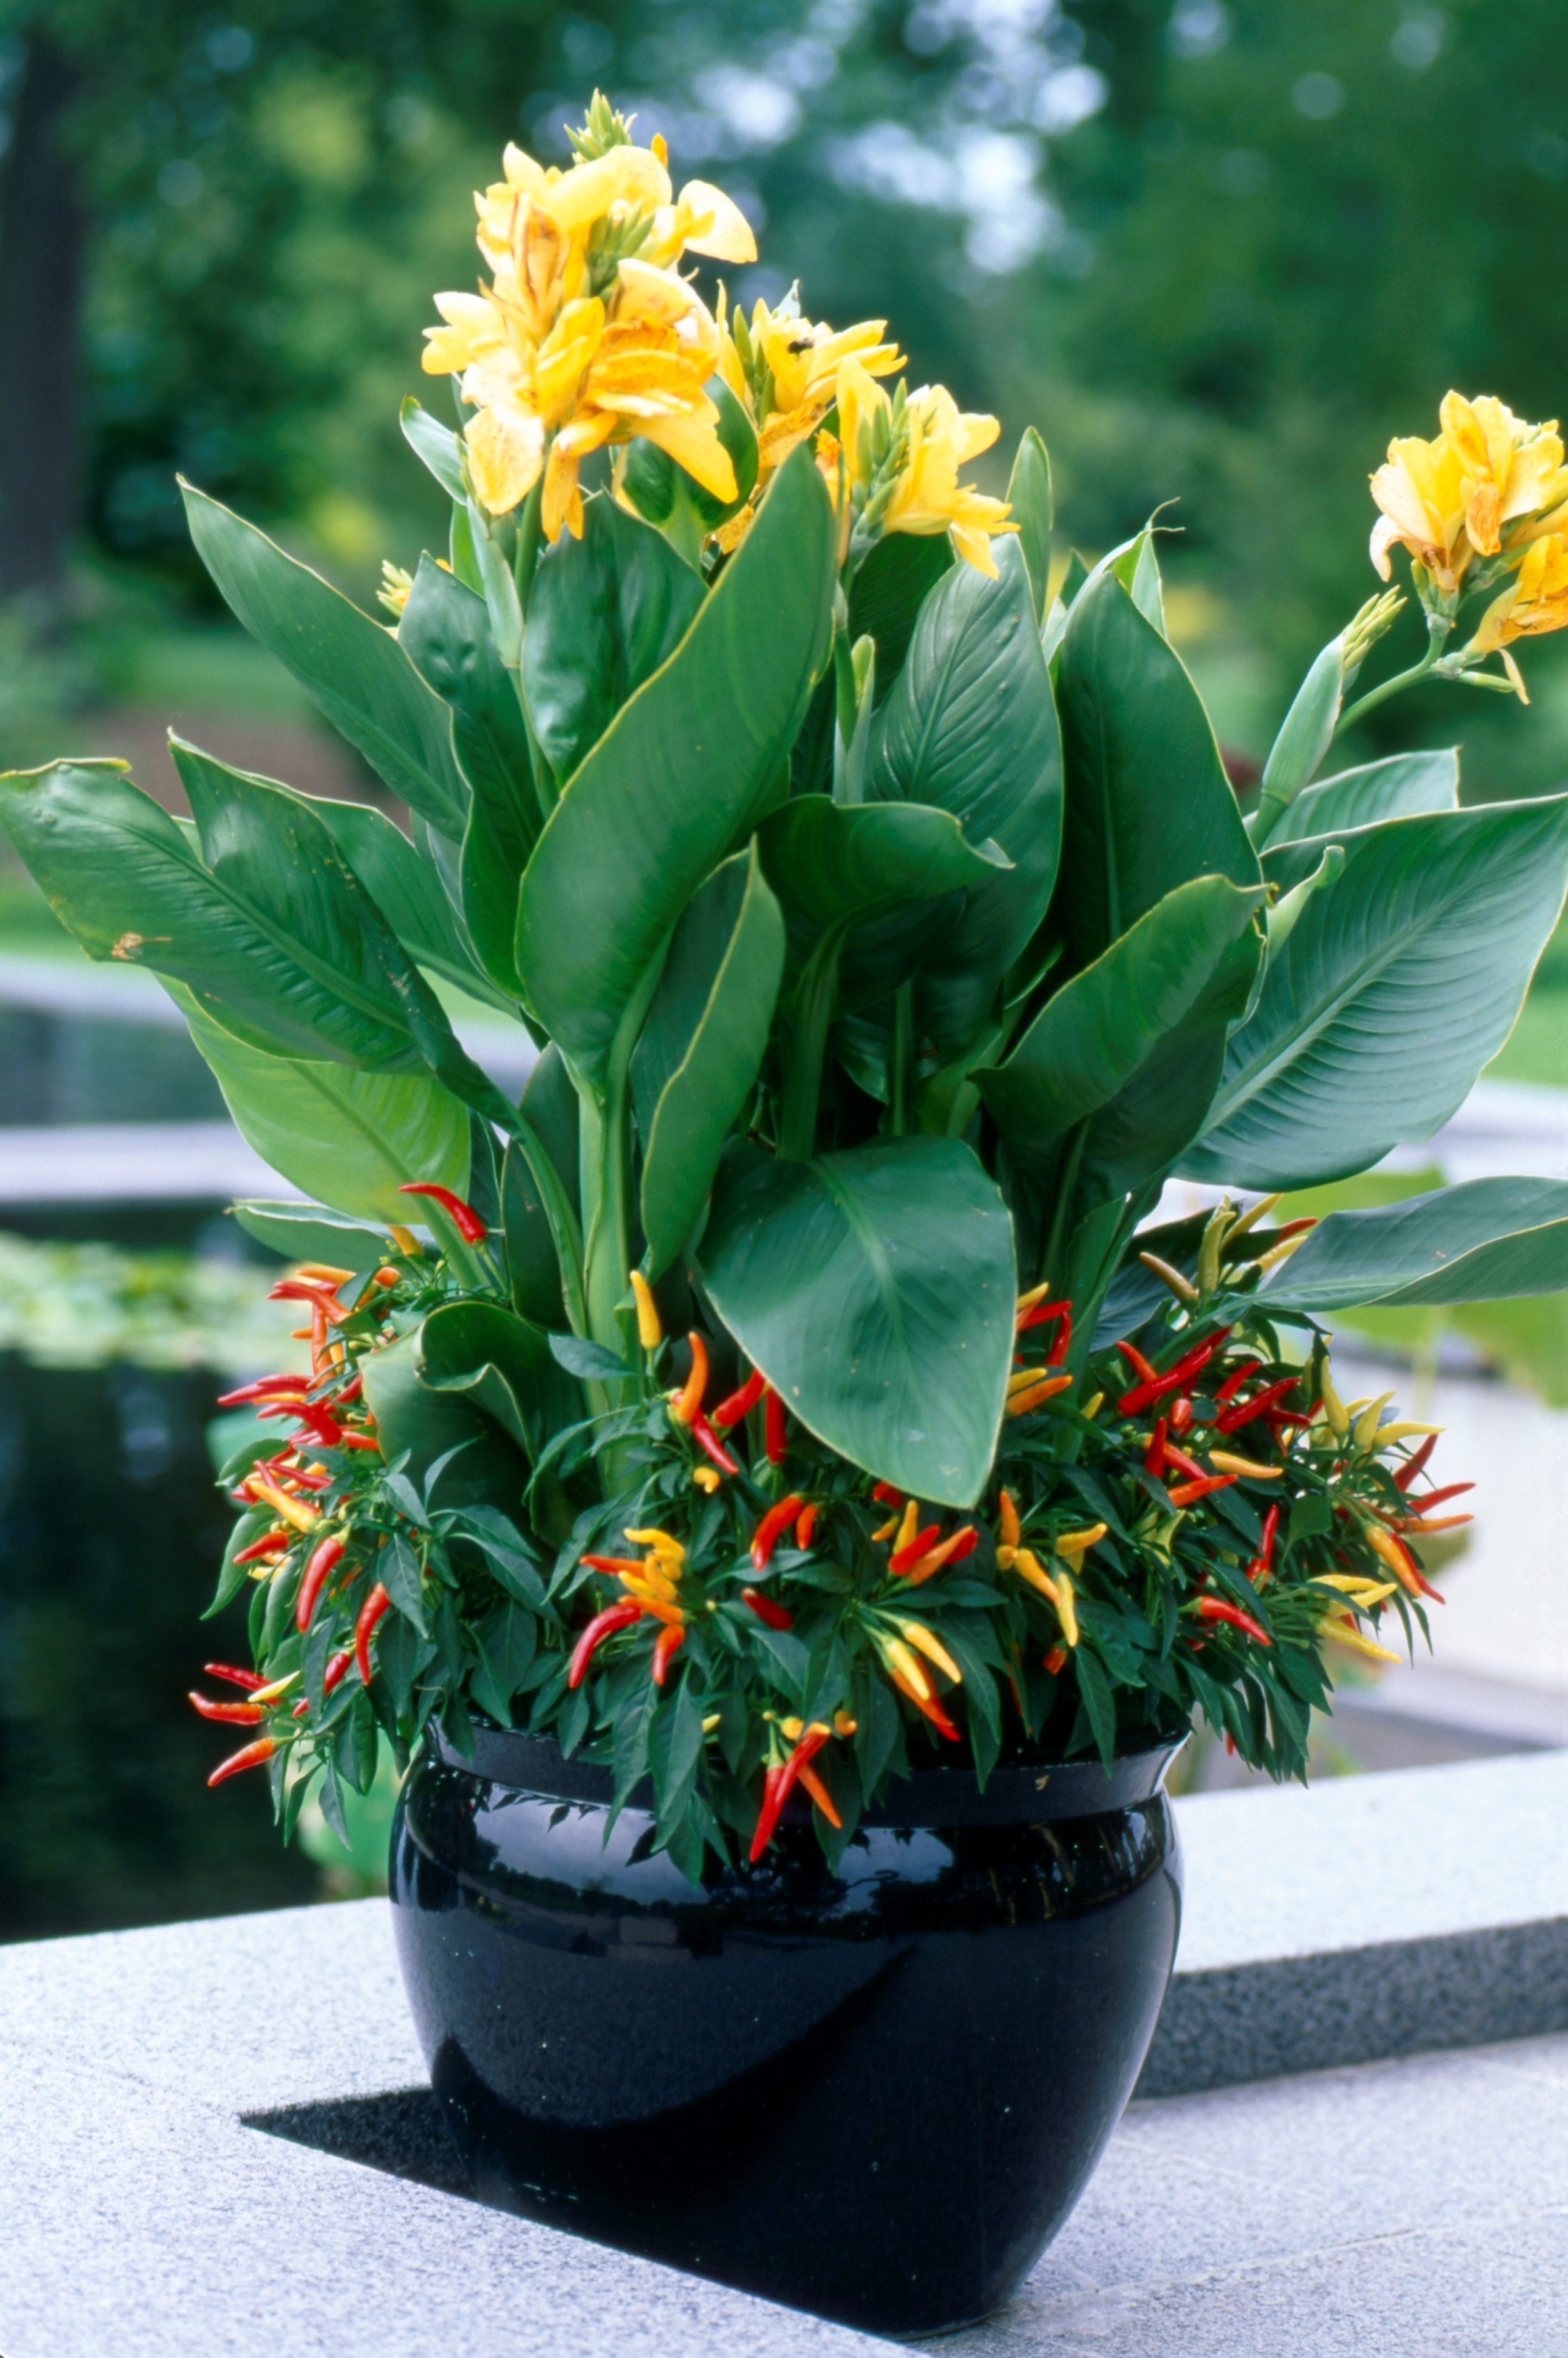 Tropical Containers Pack a Big Punch in a Small Space